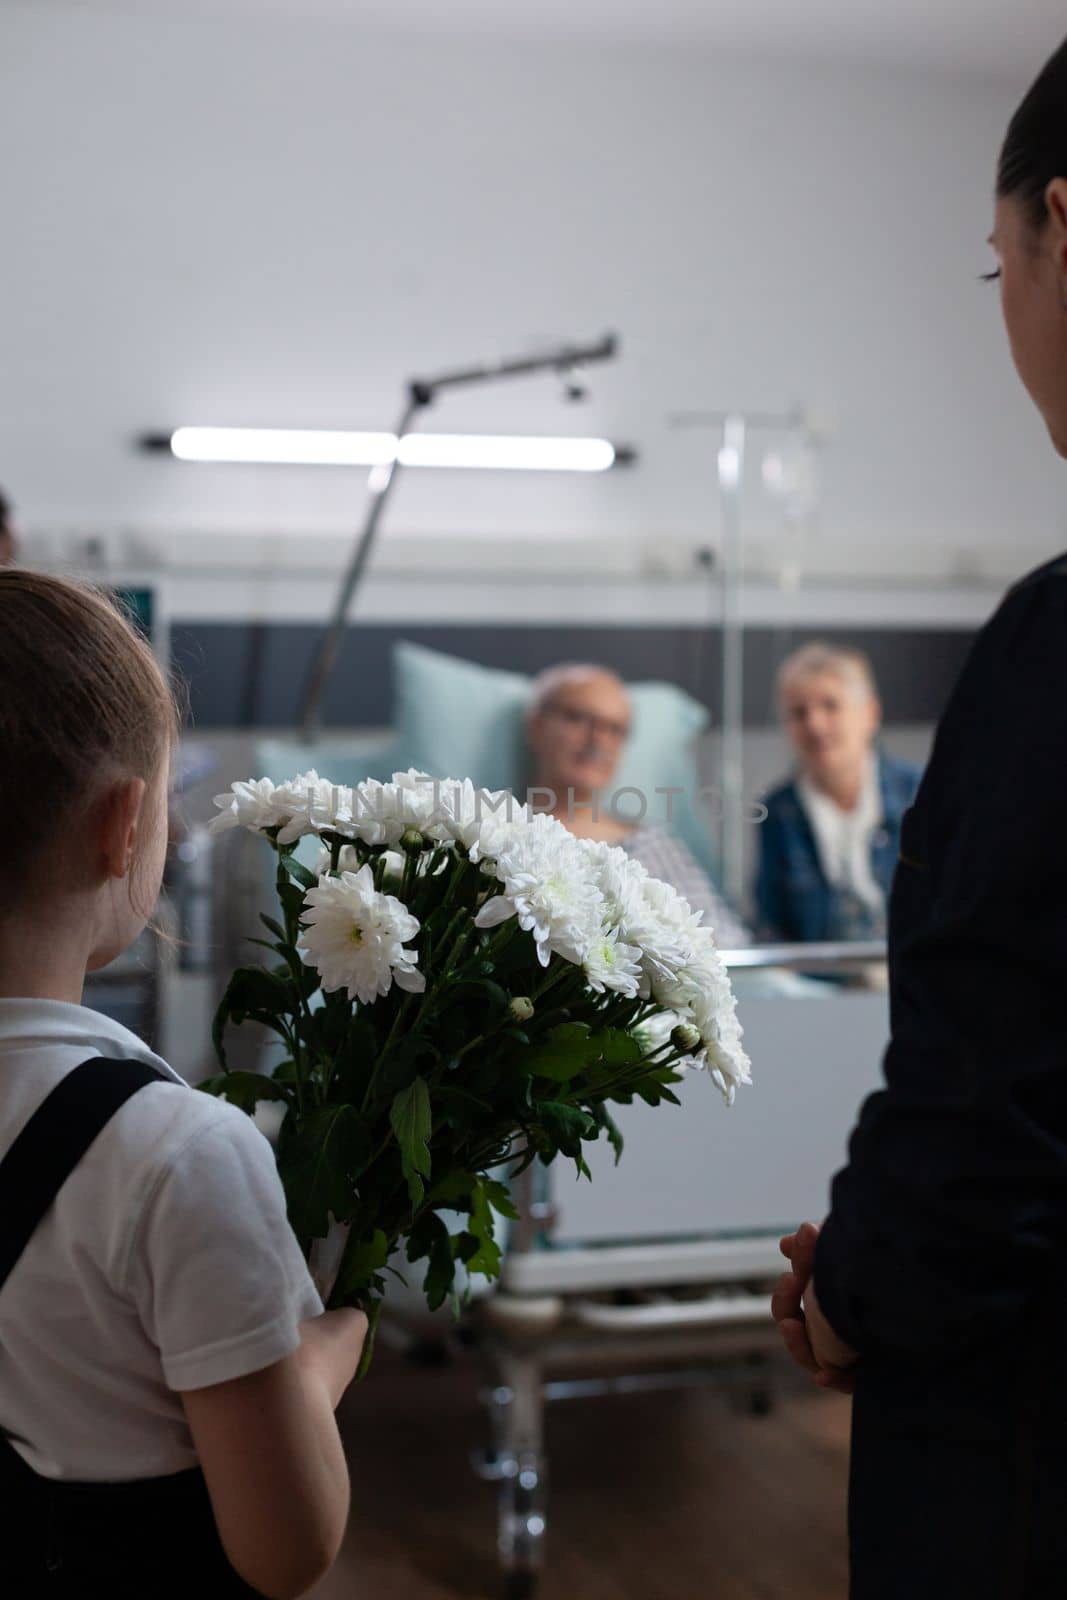 Elderly couple being visited by daughter, granddaughter in geriatric clinic rest room. Little girl carrying flowers gift to recovering grandfather lying in hospital bed.